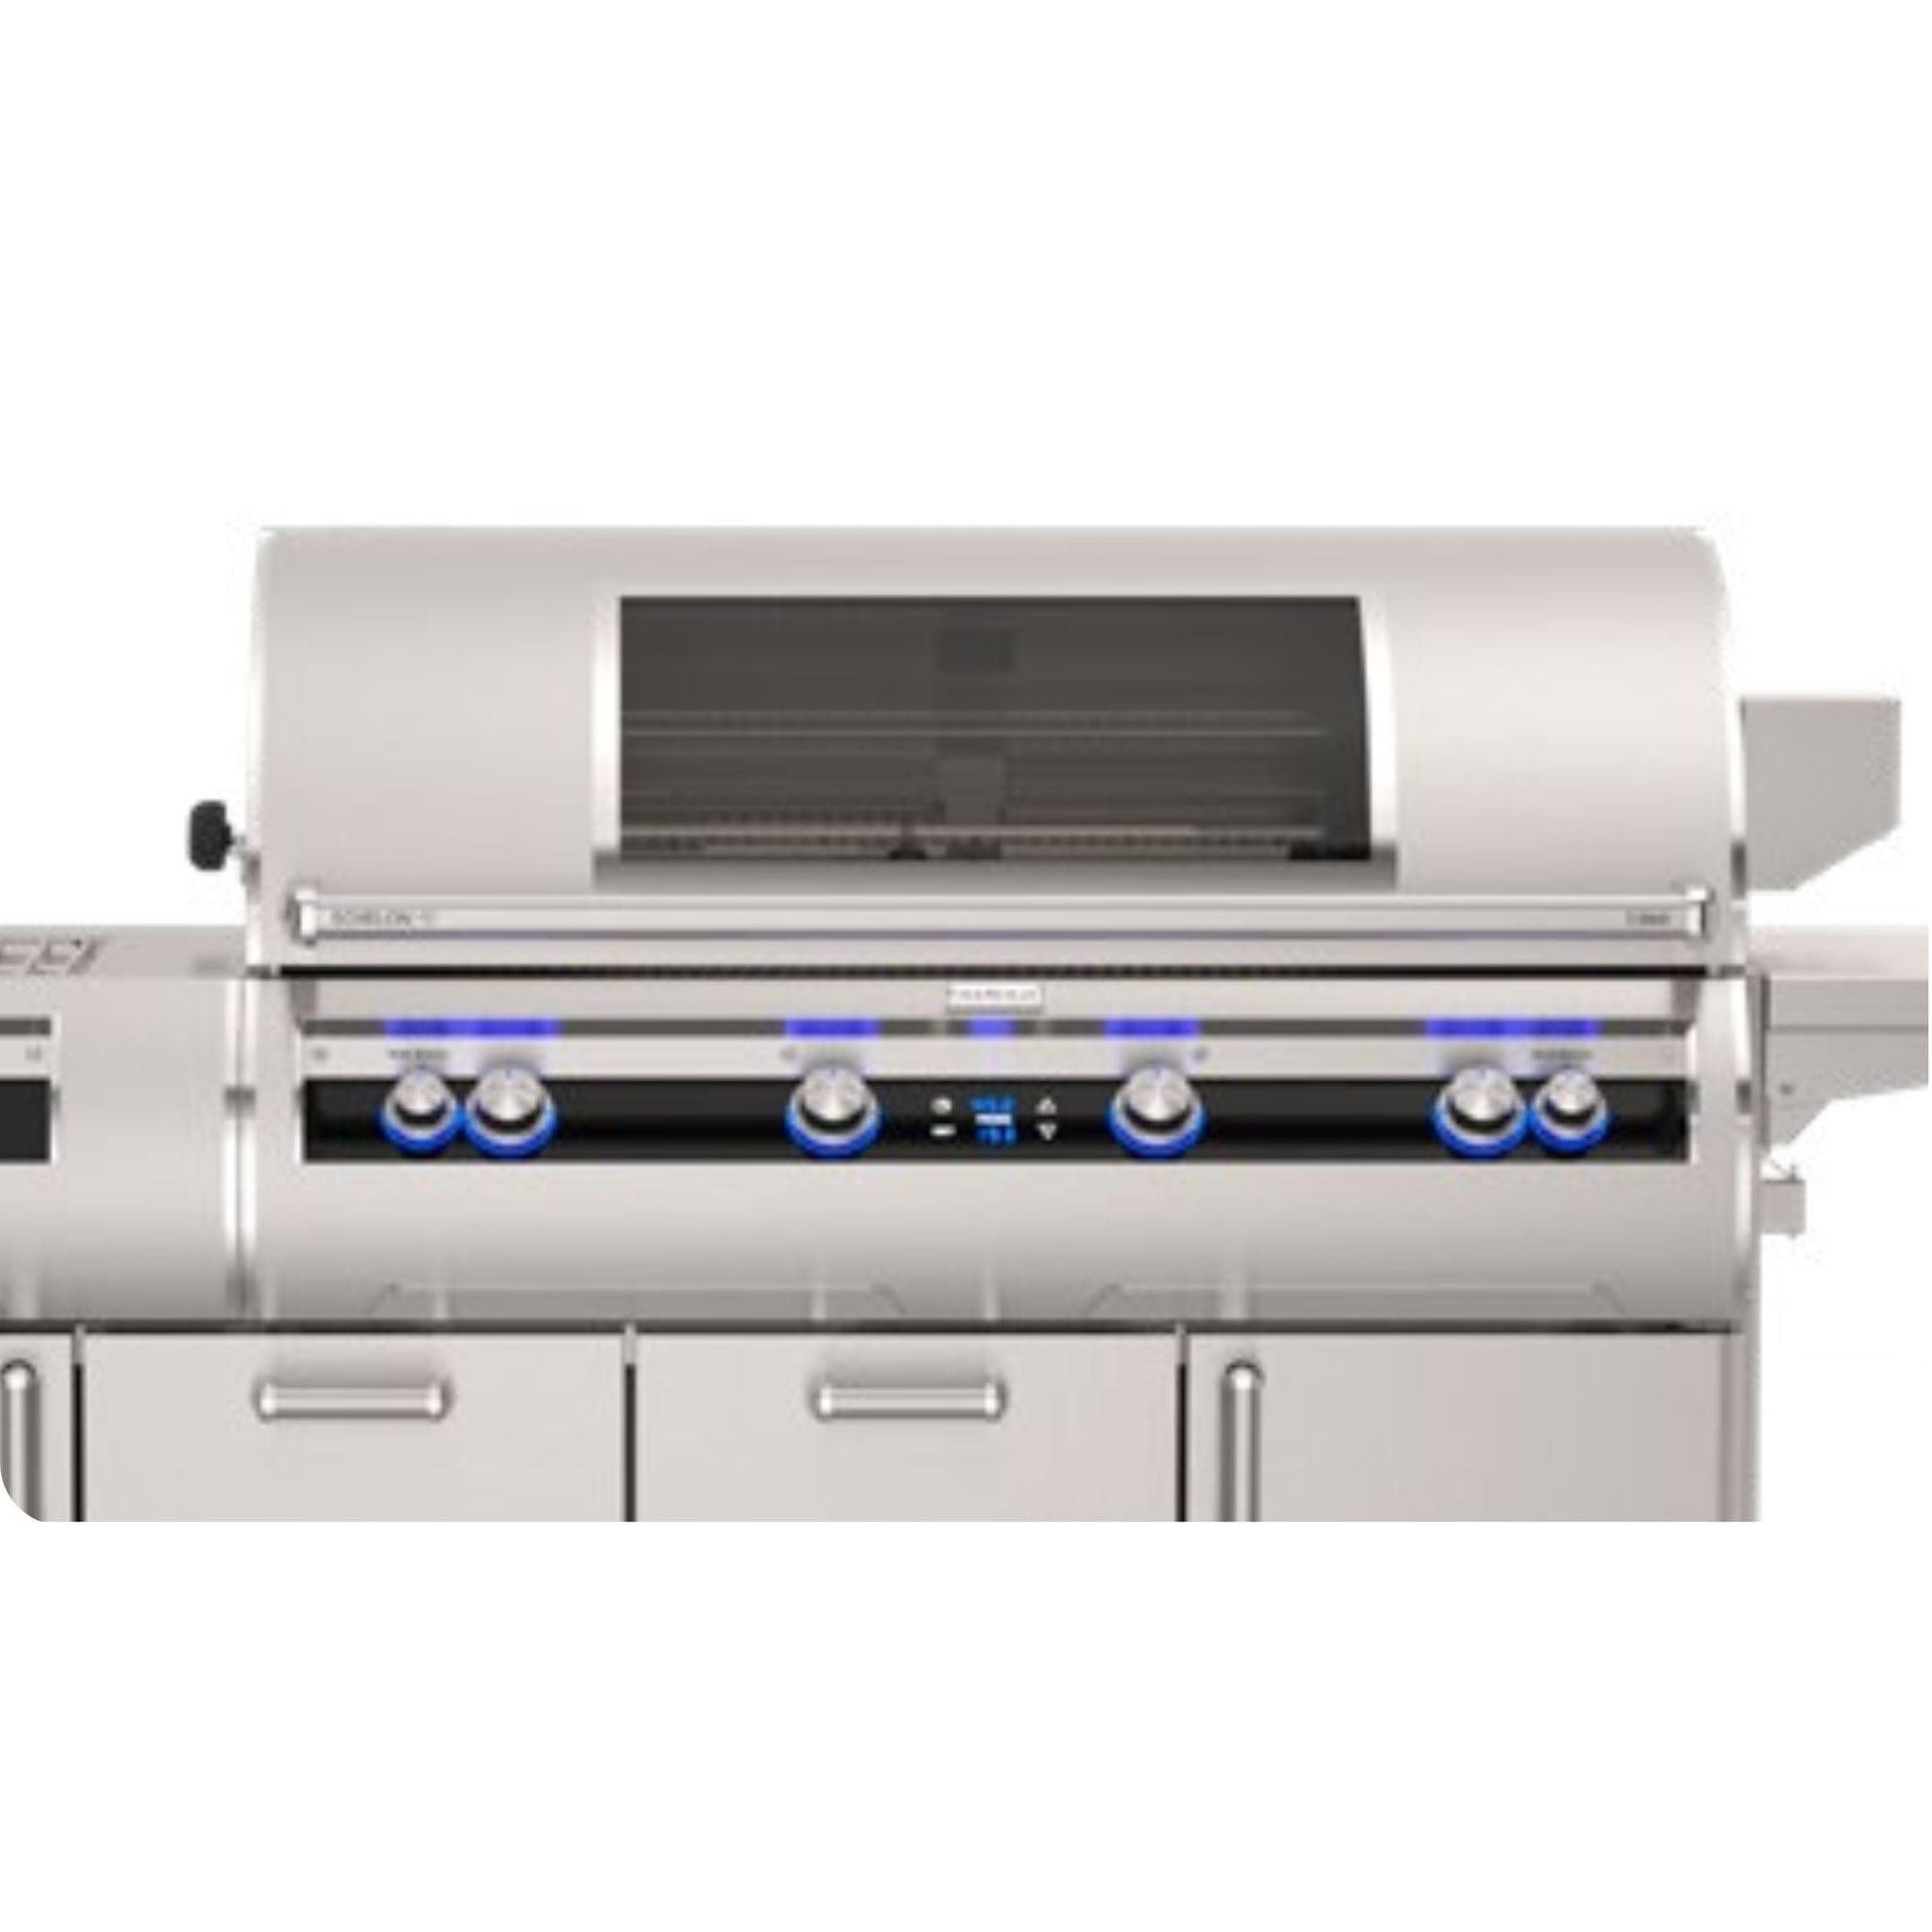 Fire Magic Echelon Diamond E1060s 48" 4-Burner Portable Gas Grill With Power Burner, Digital Thermometer and Optional Magic View Window